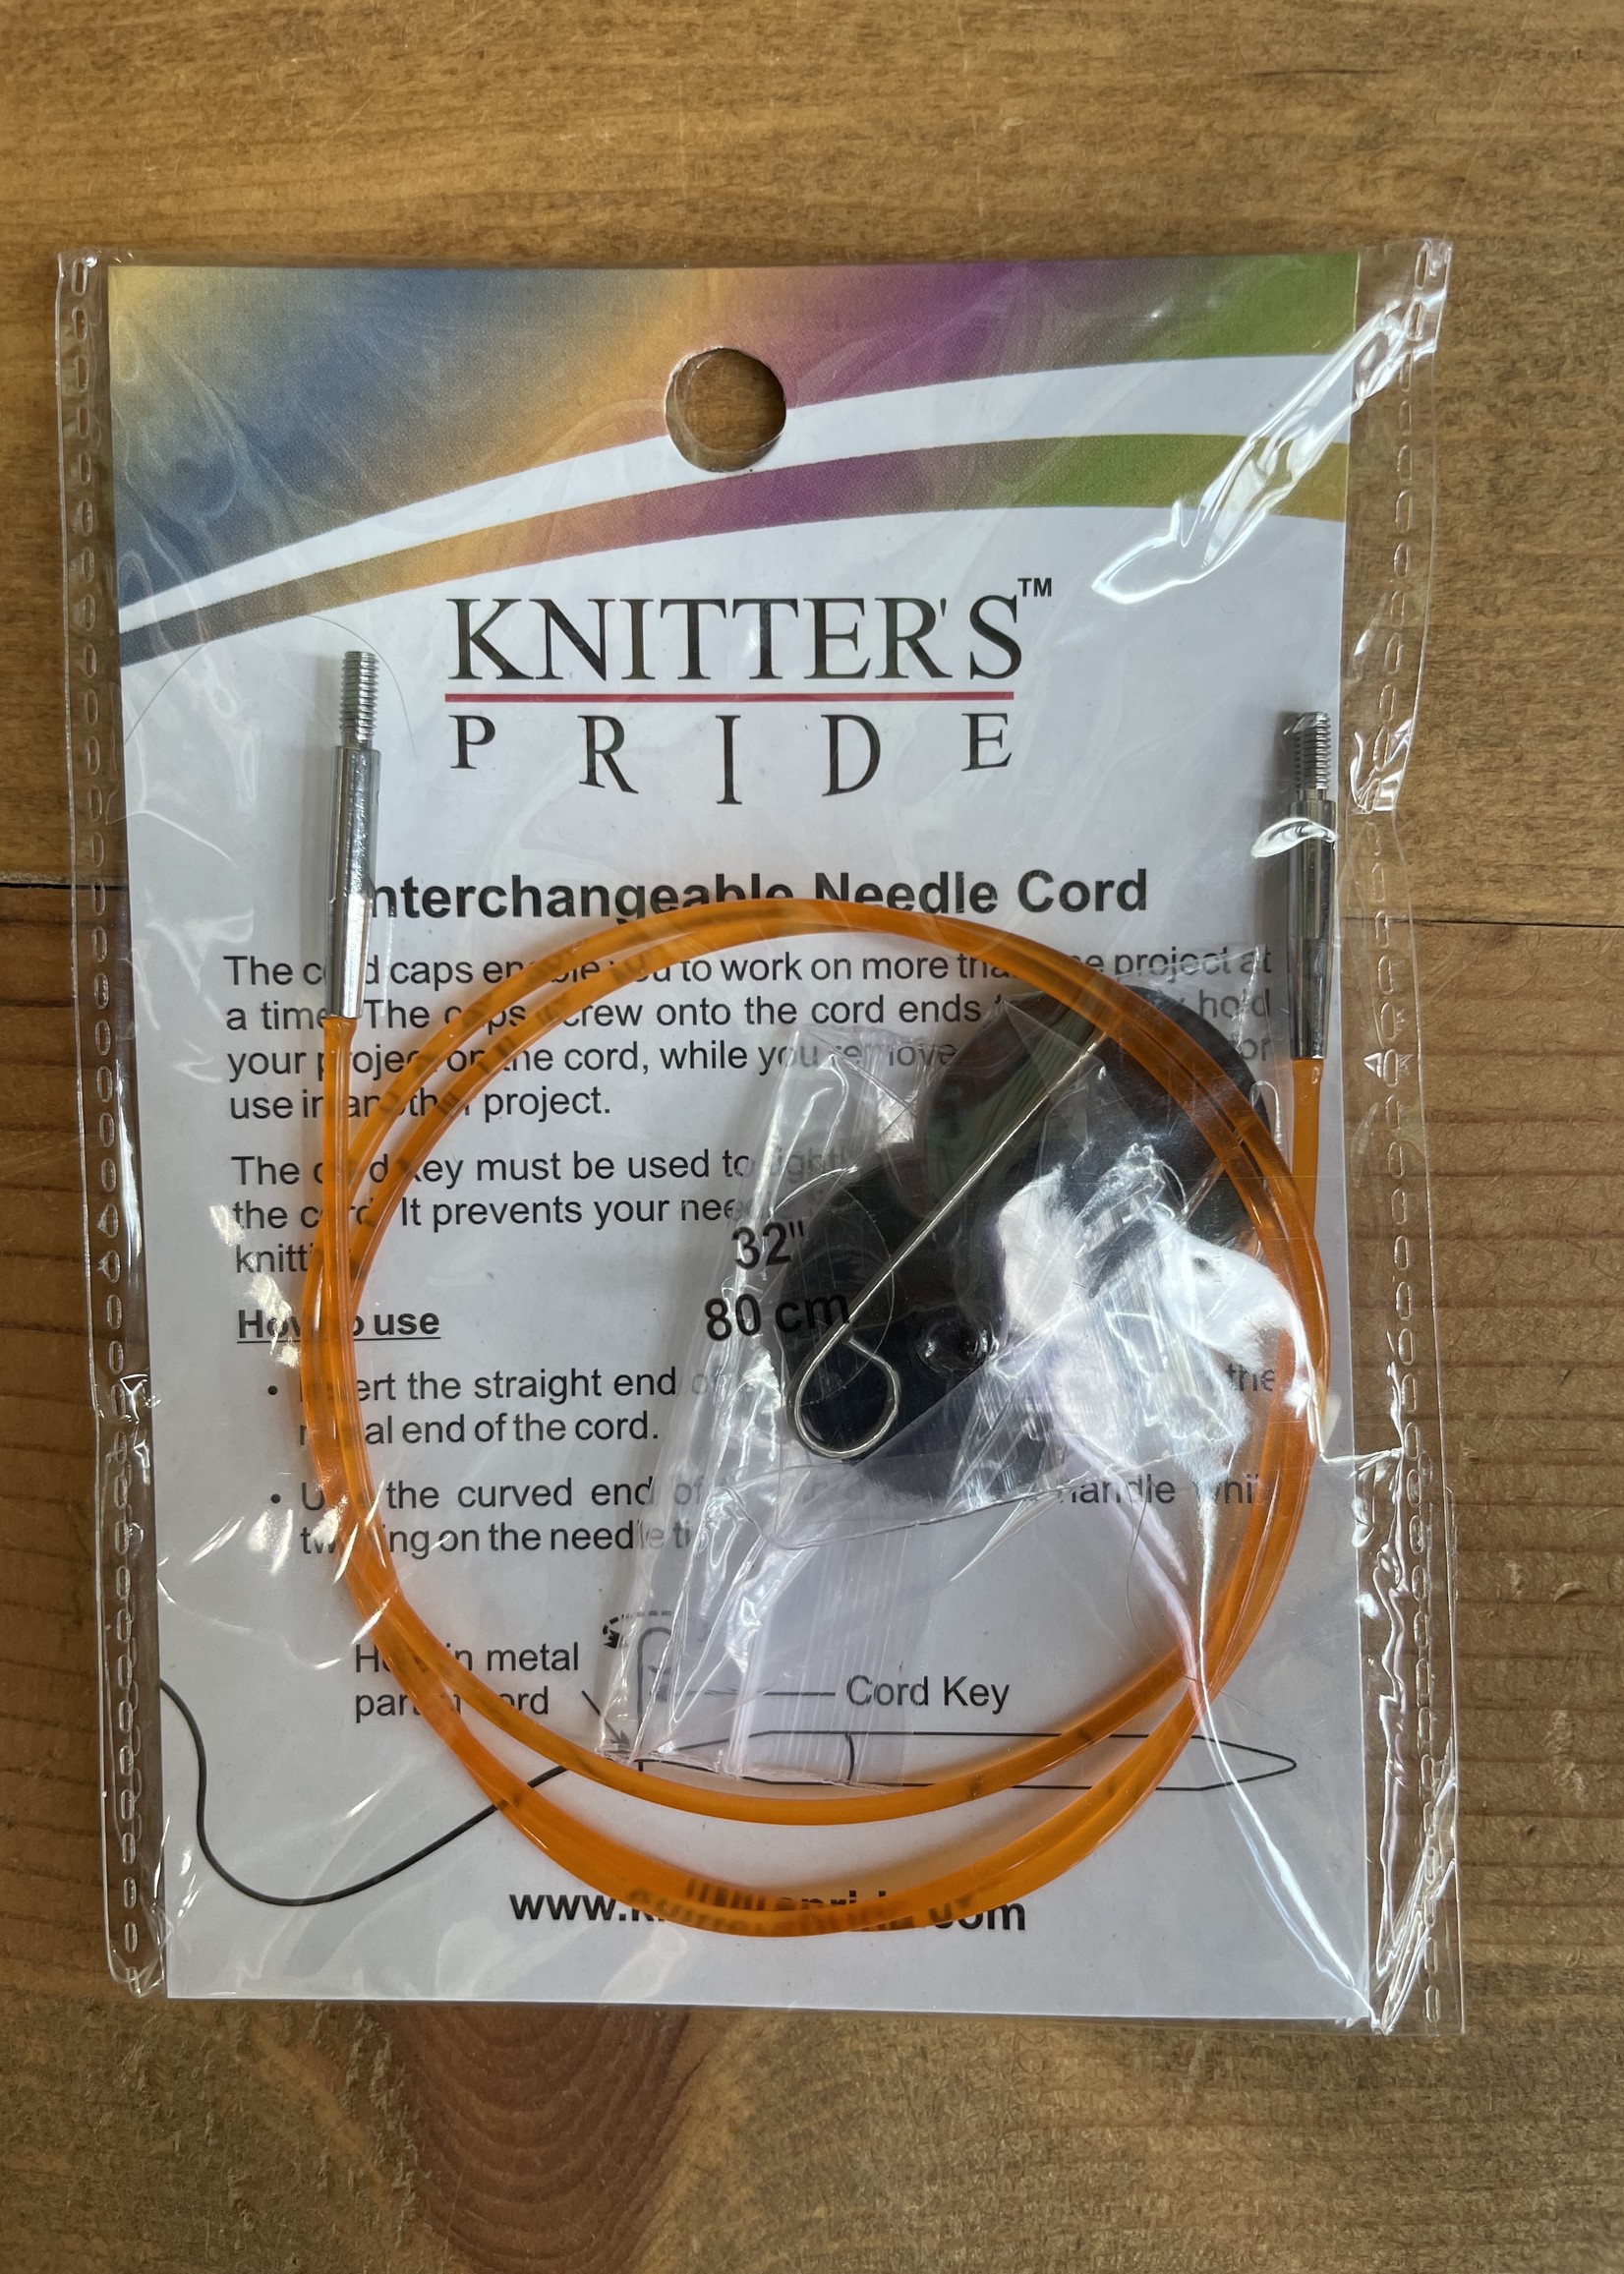 knitters Pride Interchangeable Needle Cord